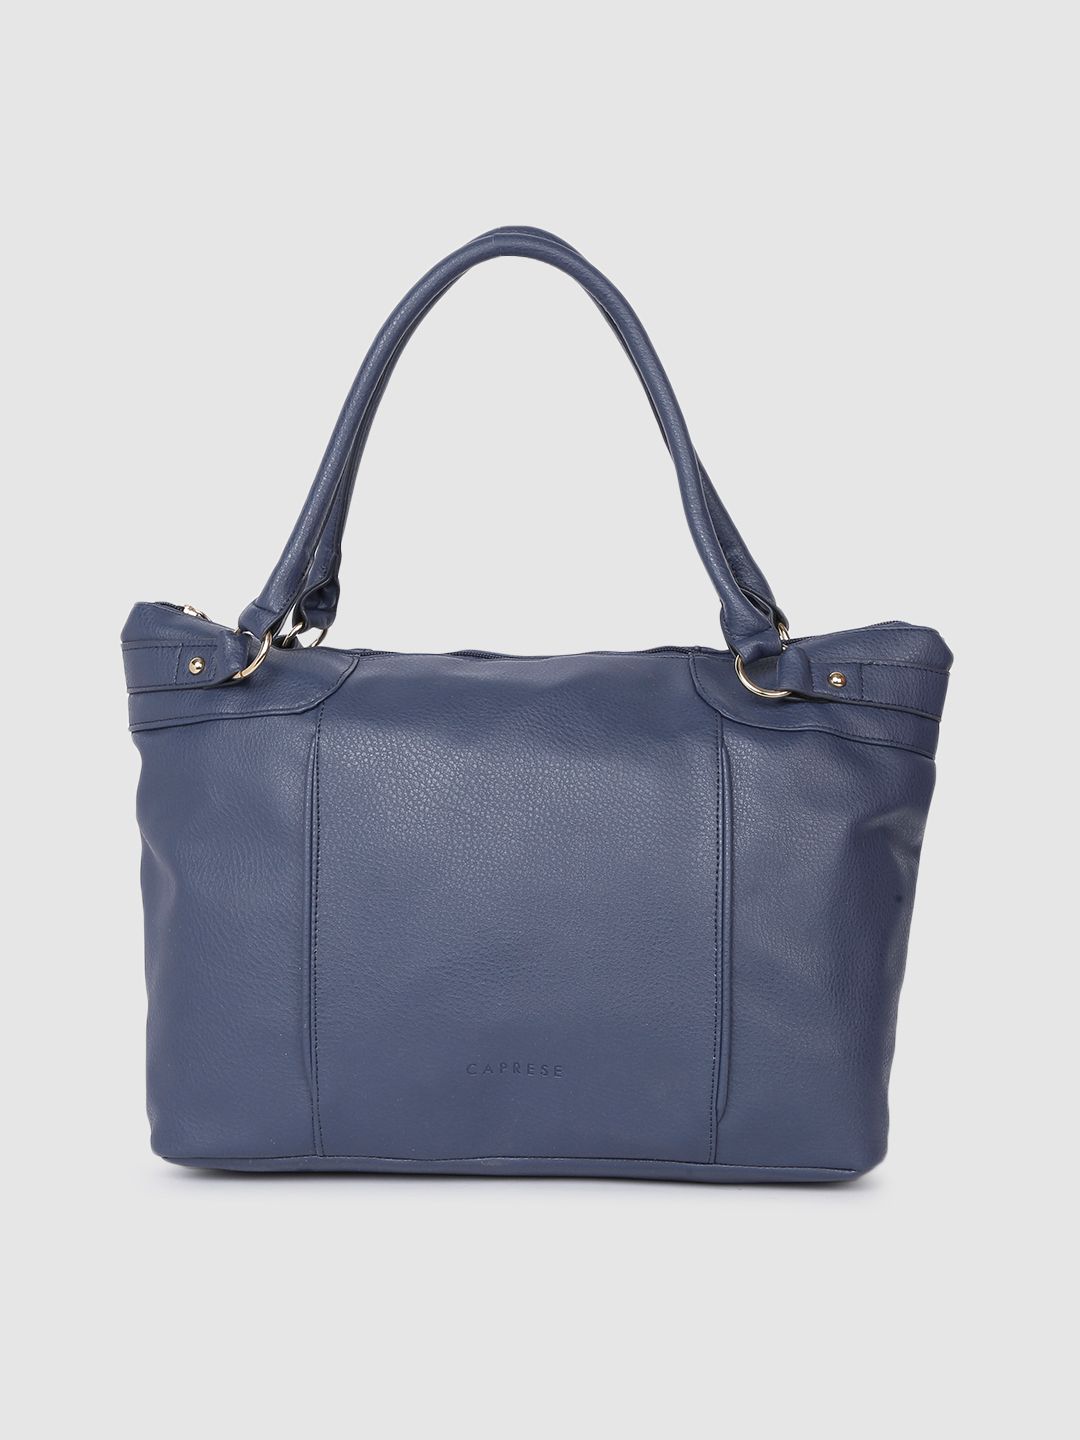 Caprese Women Blue Solid Leather Shoulder Bag Price in India